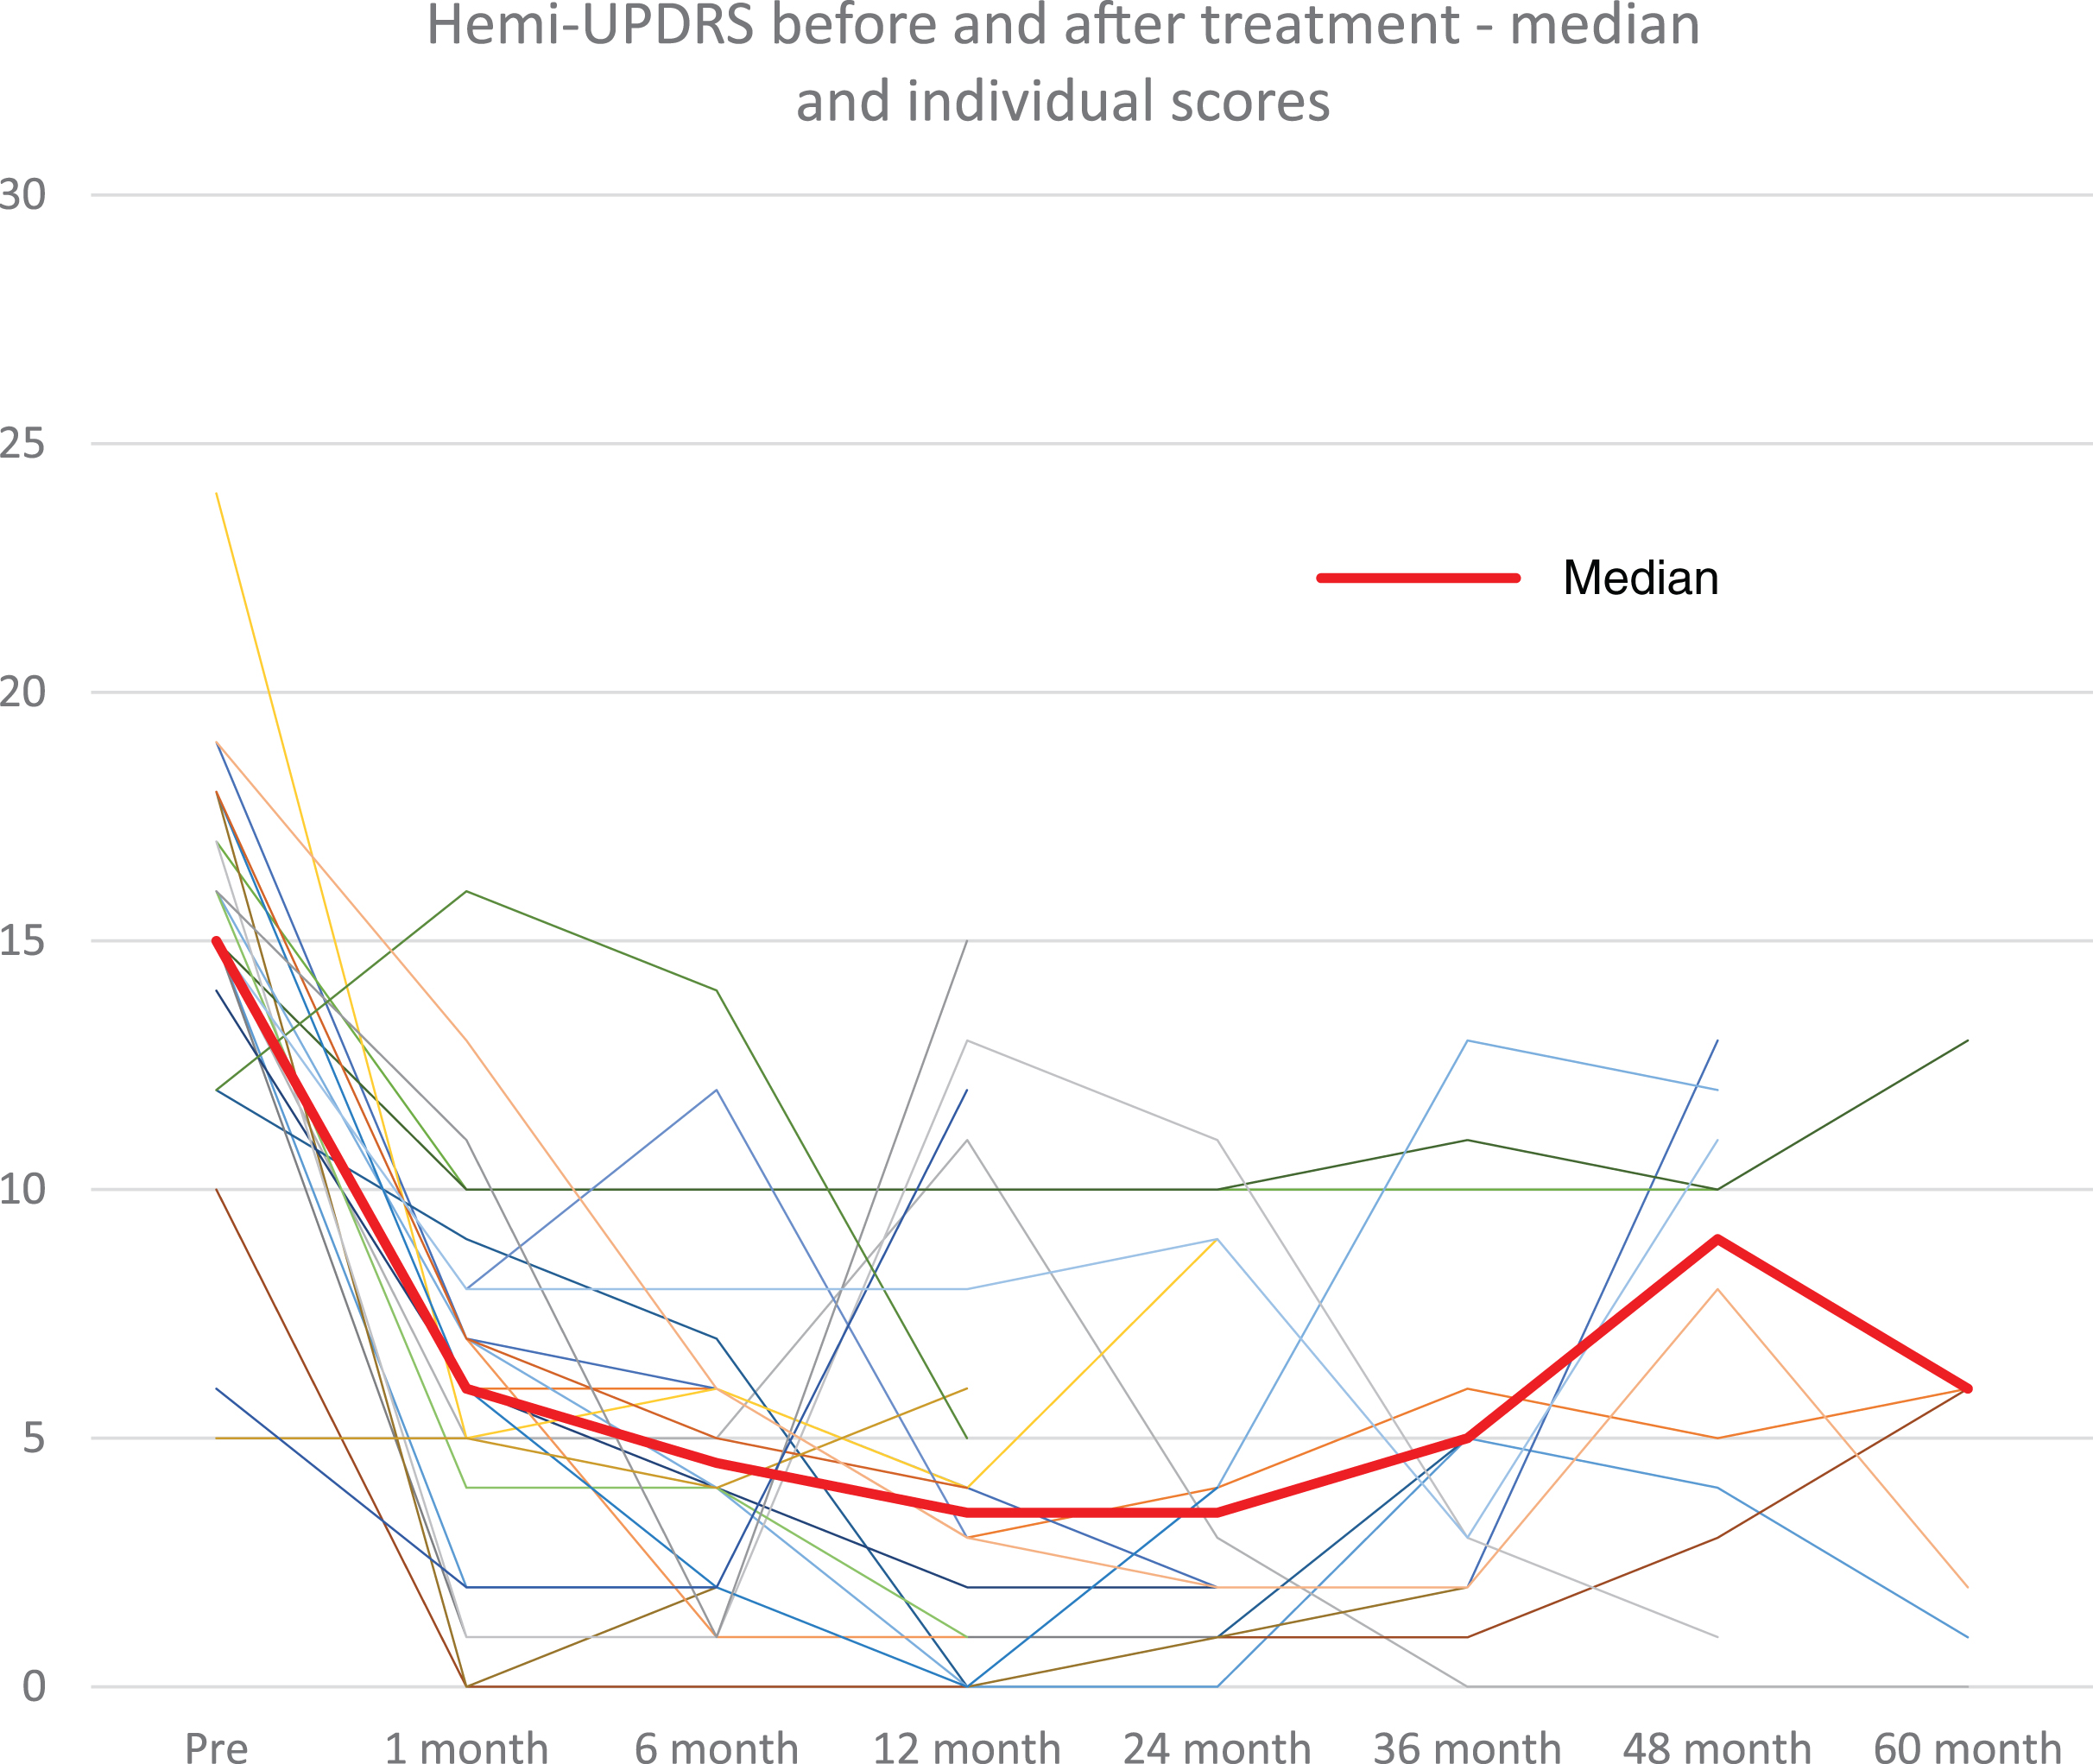 Hemi-UPDRS score at baseline and at follow-up visits for all patients (thin lines) and median score (thick line).